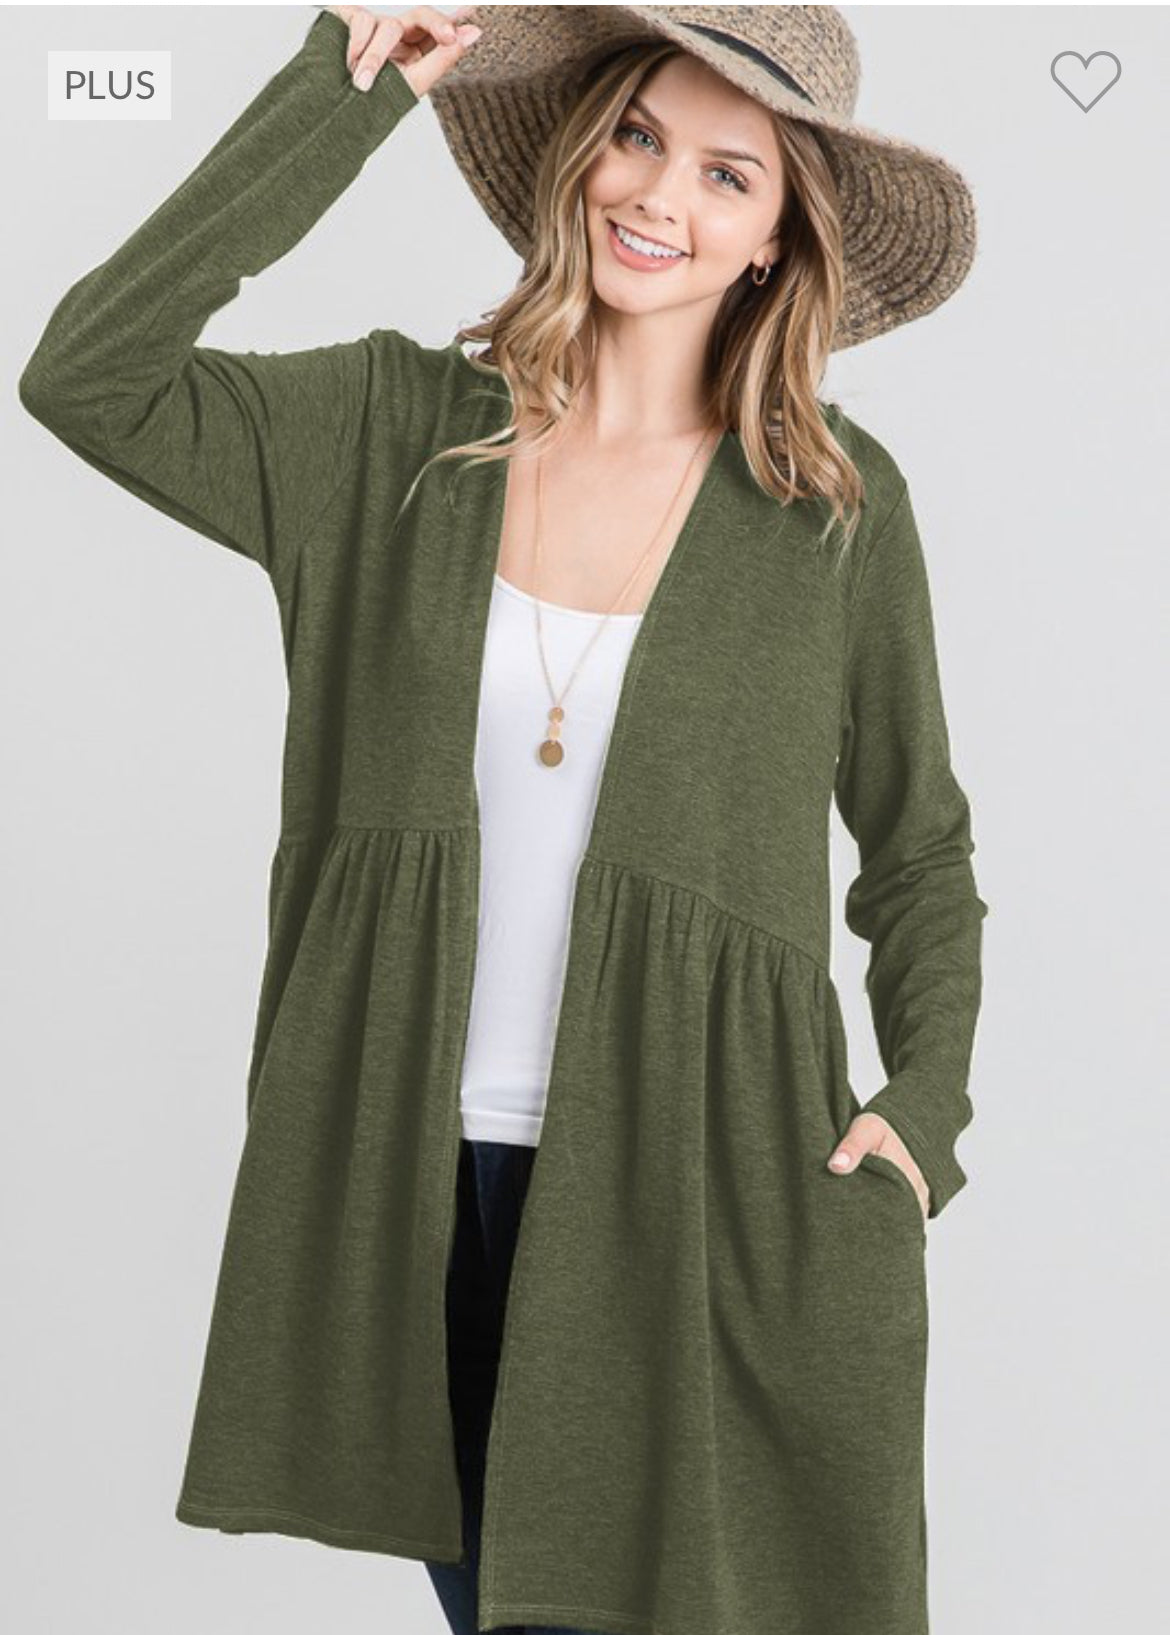 PLUS -SOLID RUFFLED OPEN CARDIGAN- Olive